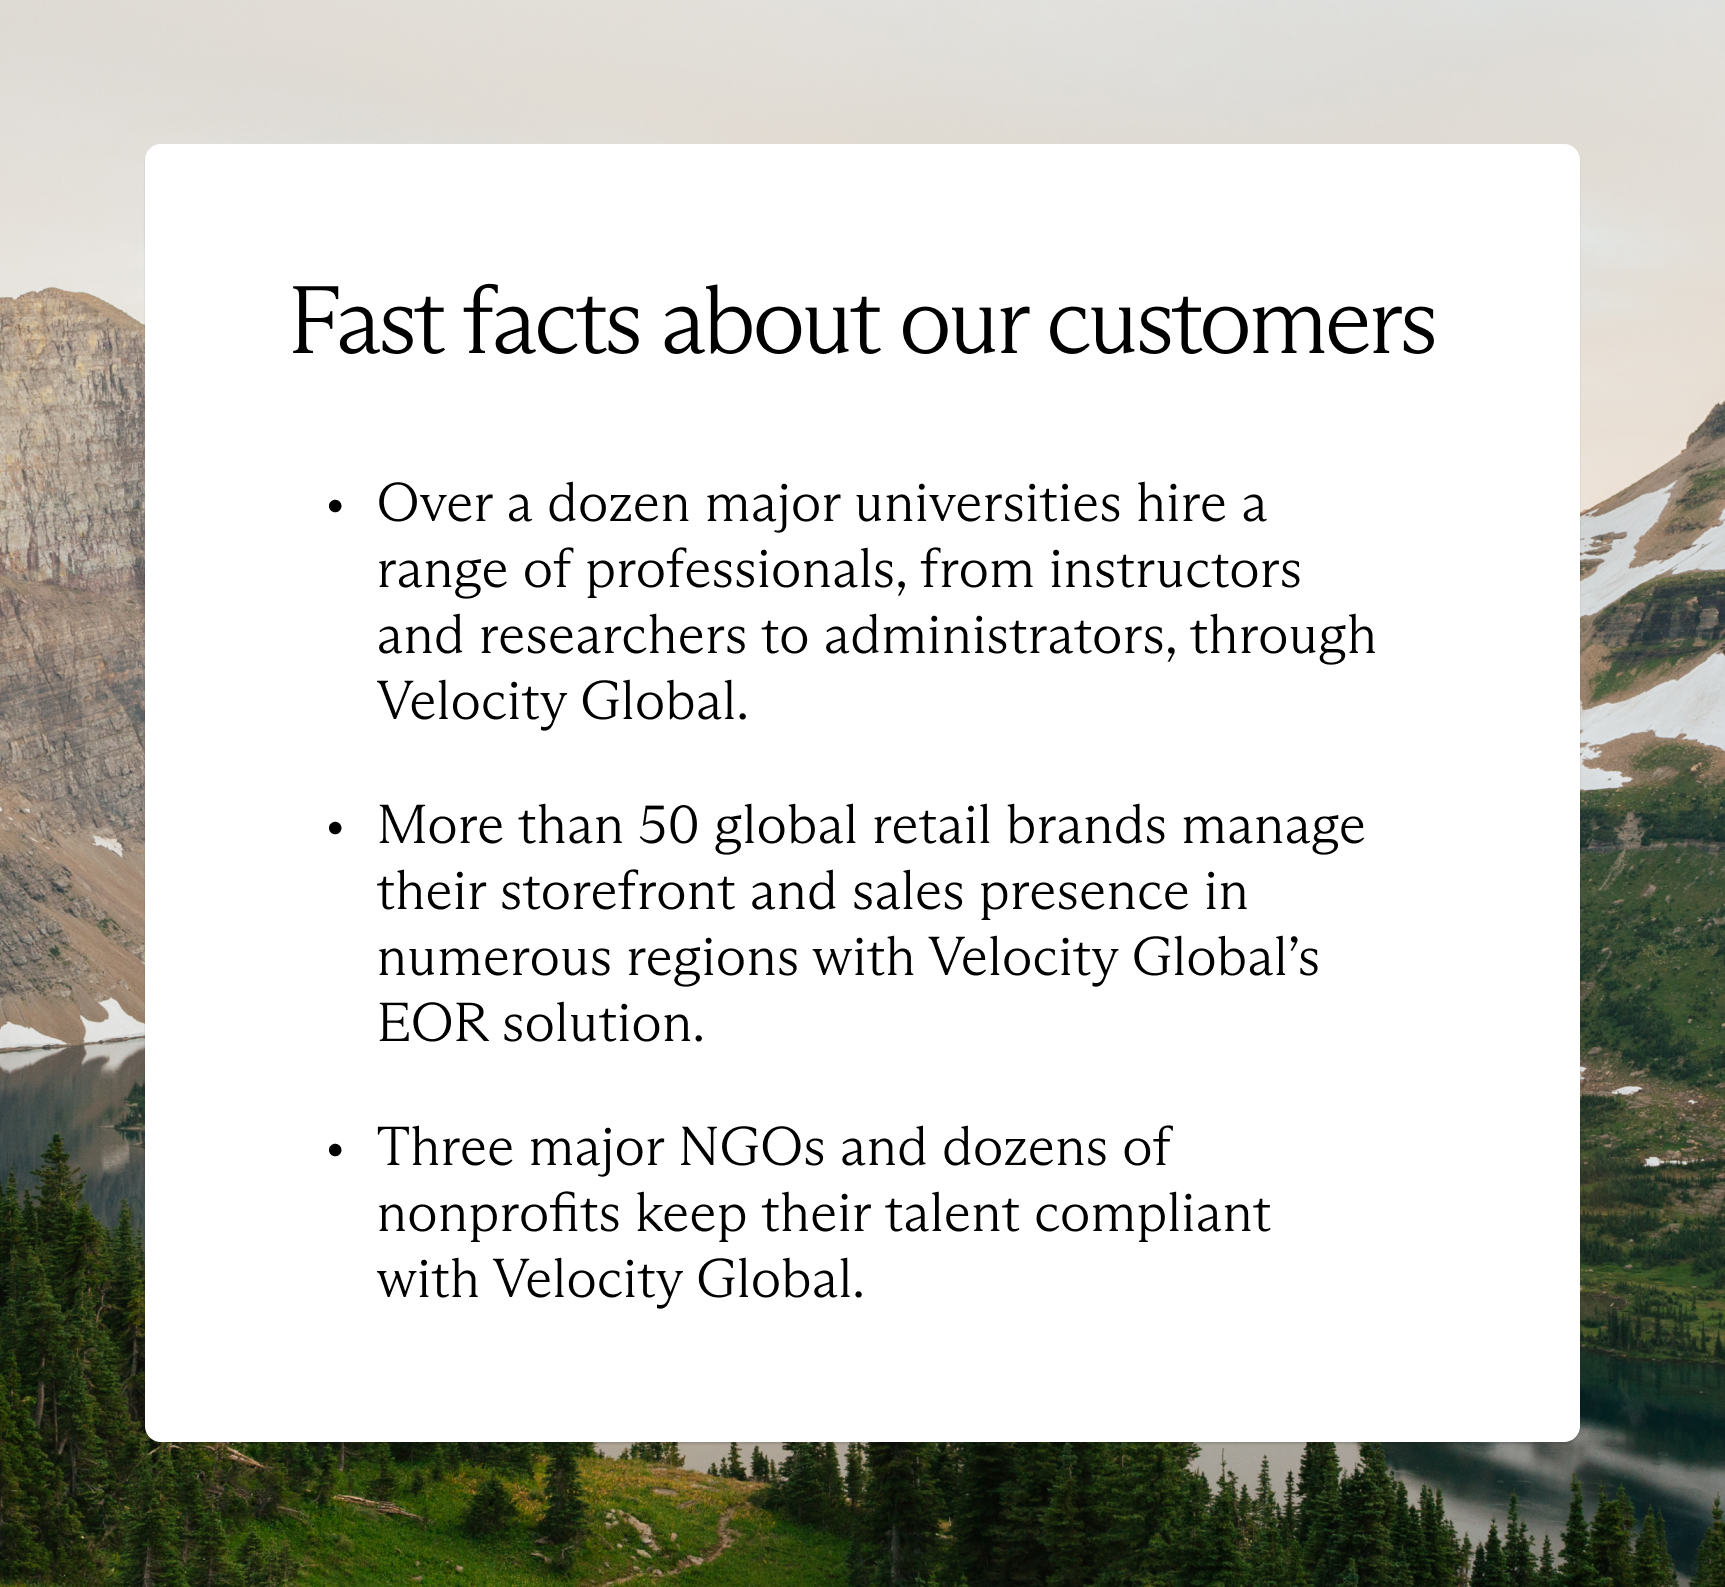 Velocity Global's customers include major universities, global retail brands, NGOs, and nonprofits